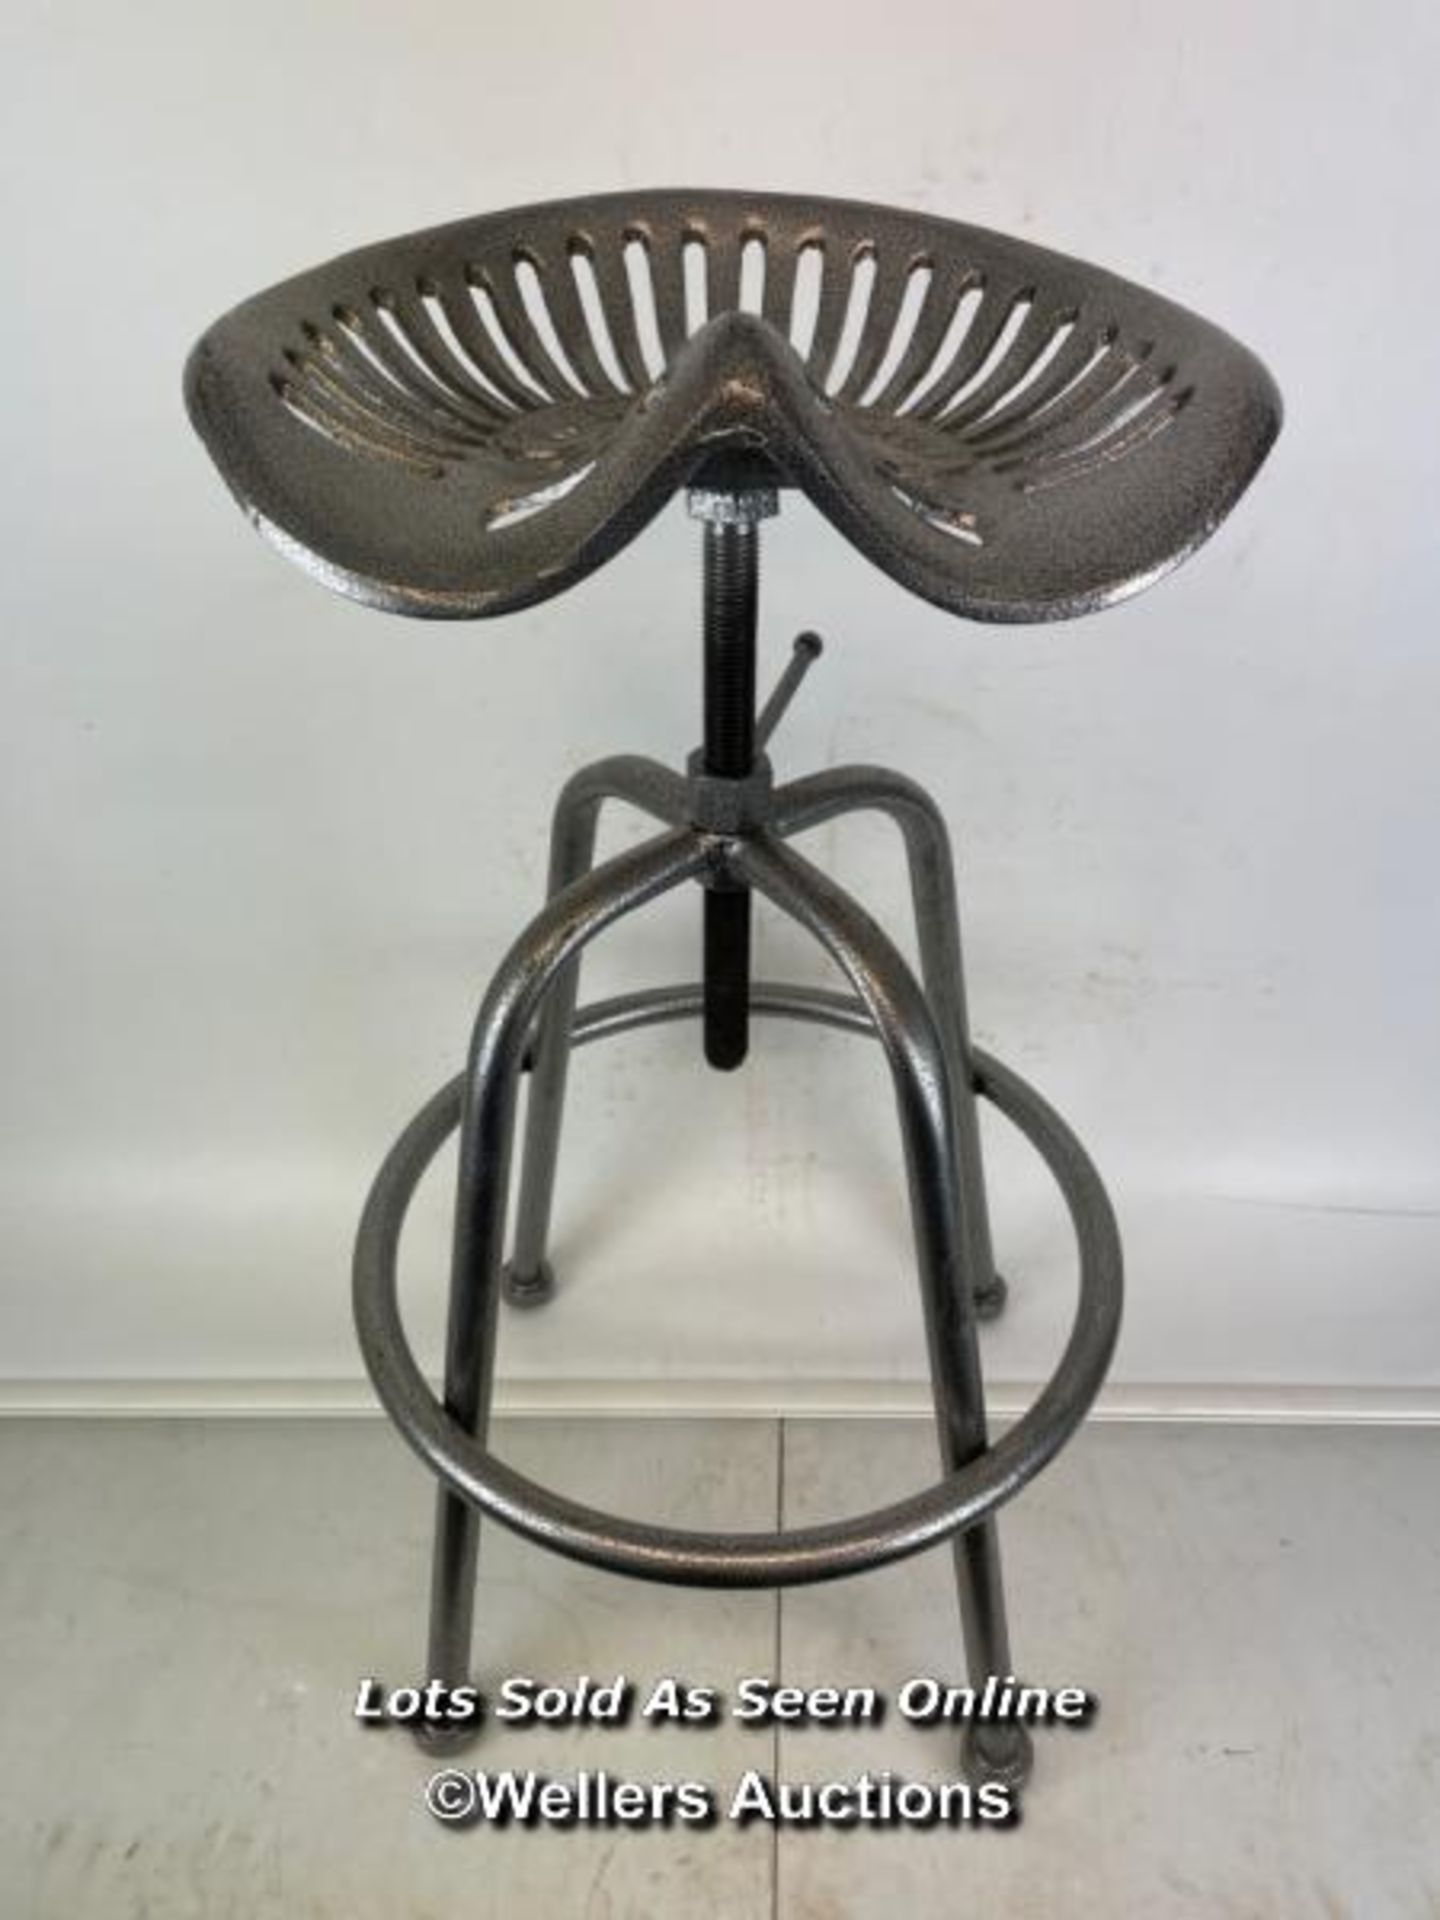 *TRACTOR STOOL, 81CM (H) / COLLECTION LOCATION: WELLERS AUCTIONS (GU1 4SJ)